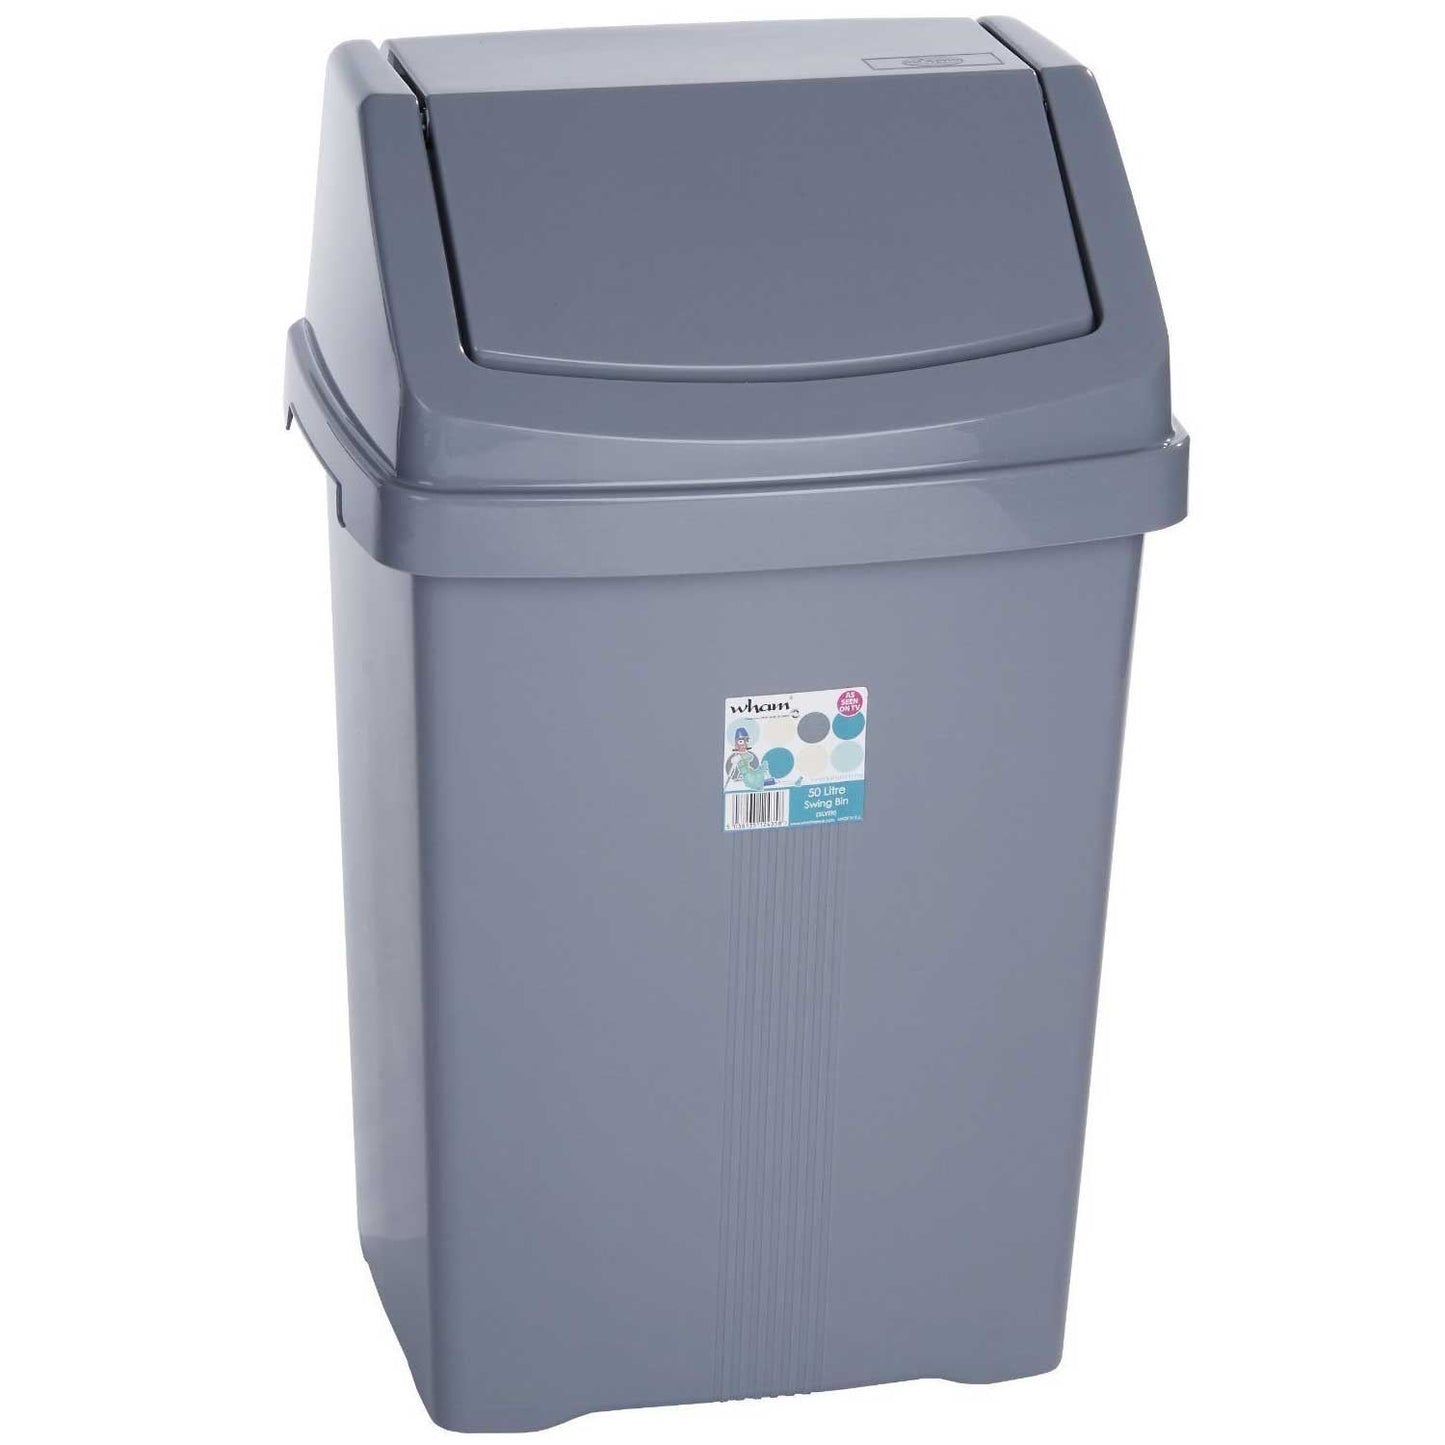 Dispose of Waste Easily with a Plastic Swing Top Bin